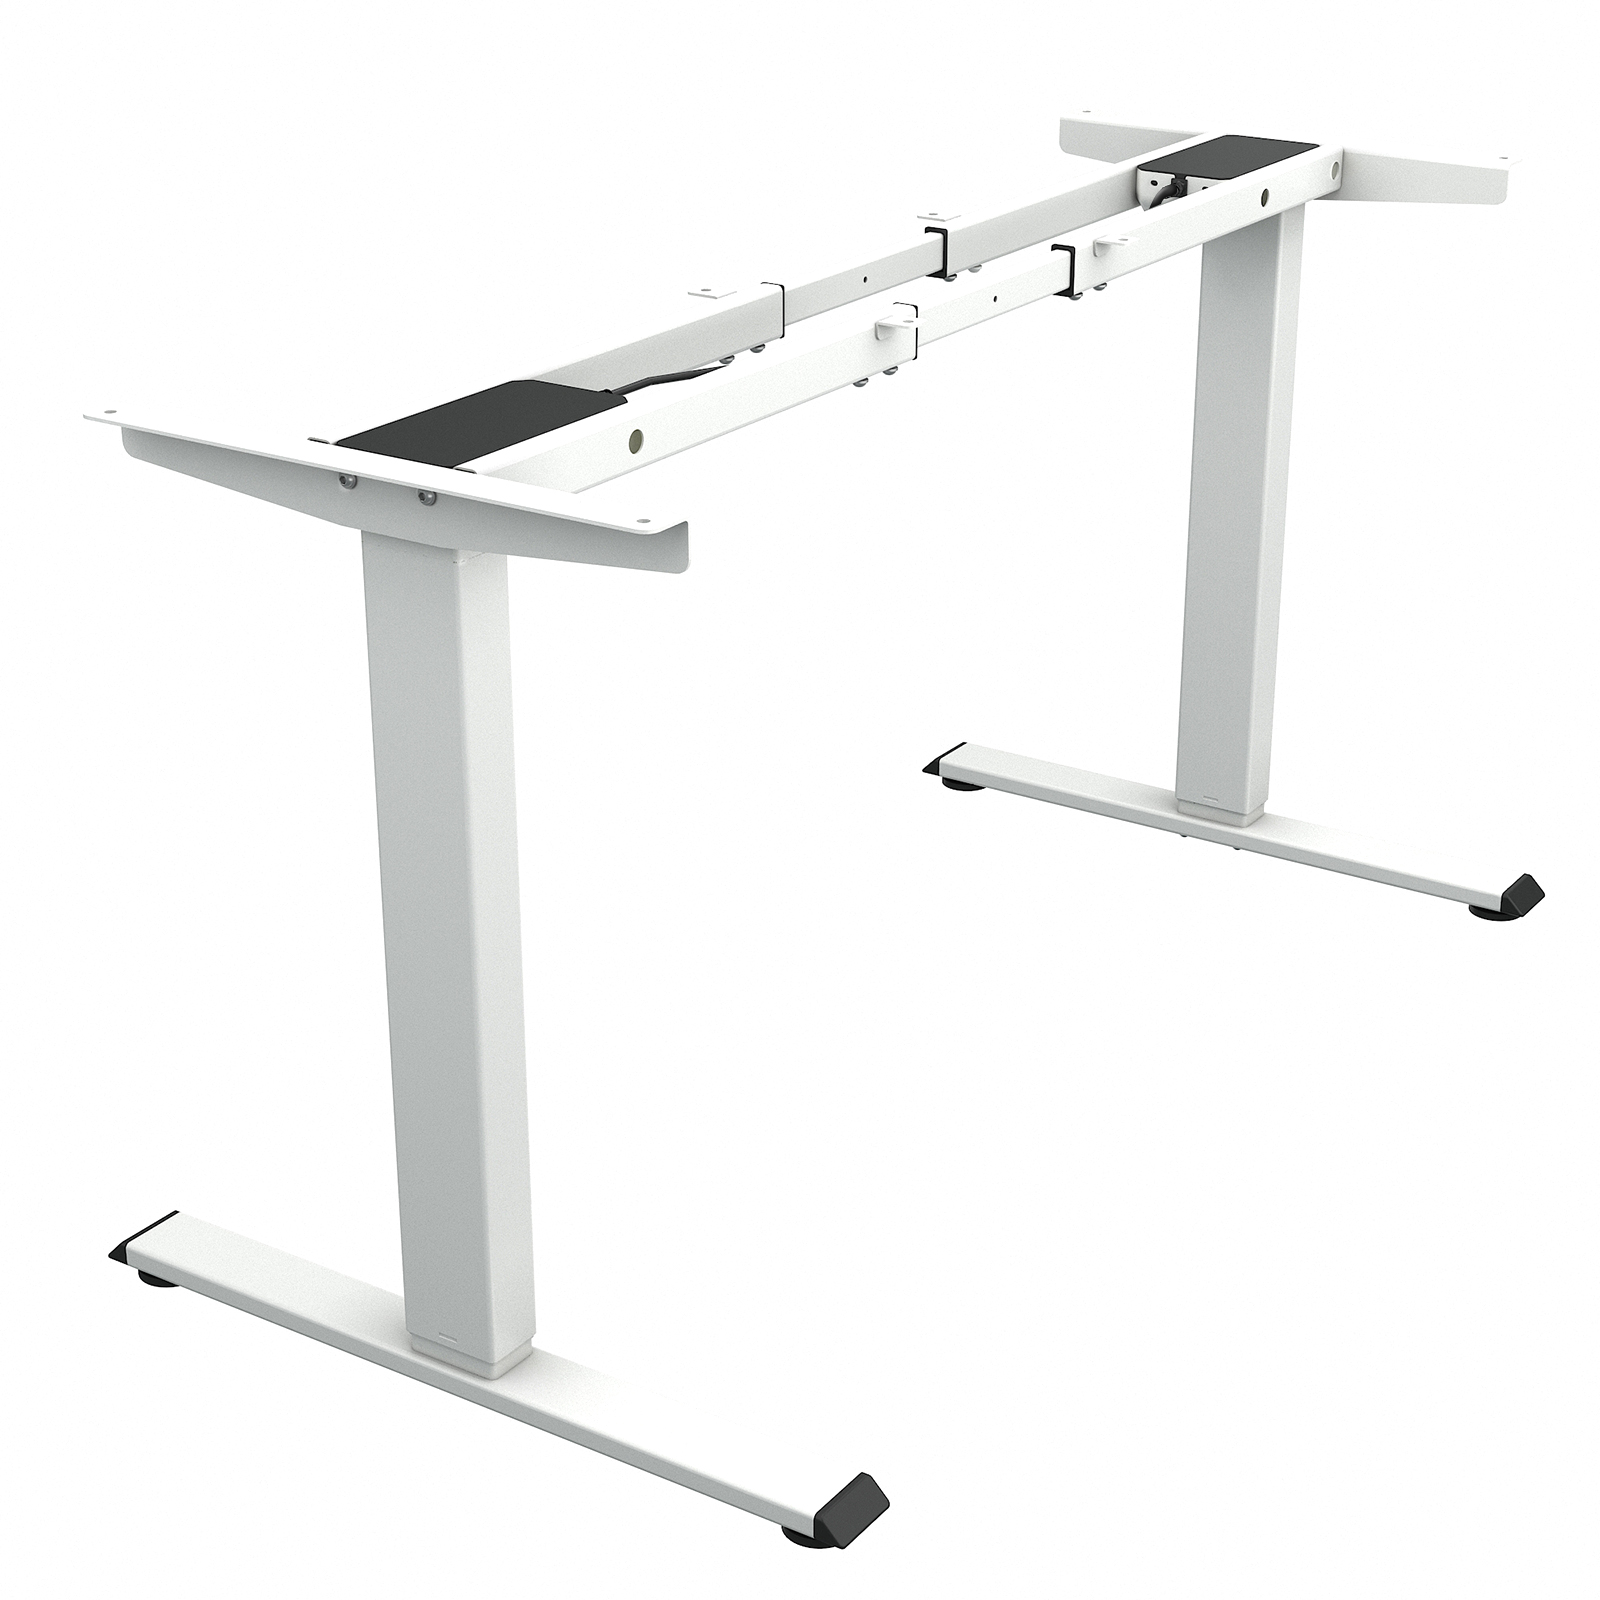 TOPSKY Dual Motor Electric Adjustable Standing Computer Desk for Home and Office DF02.01